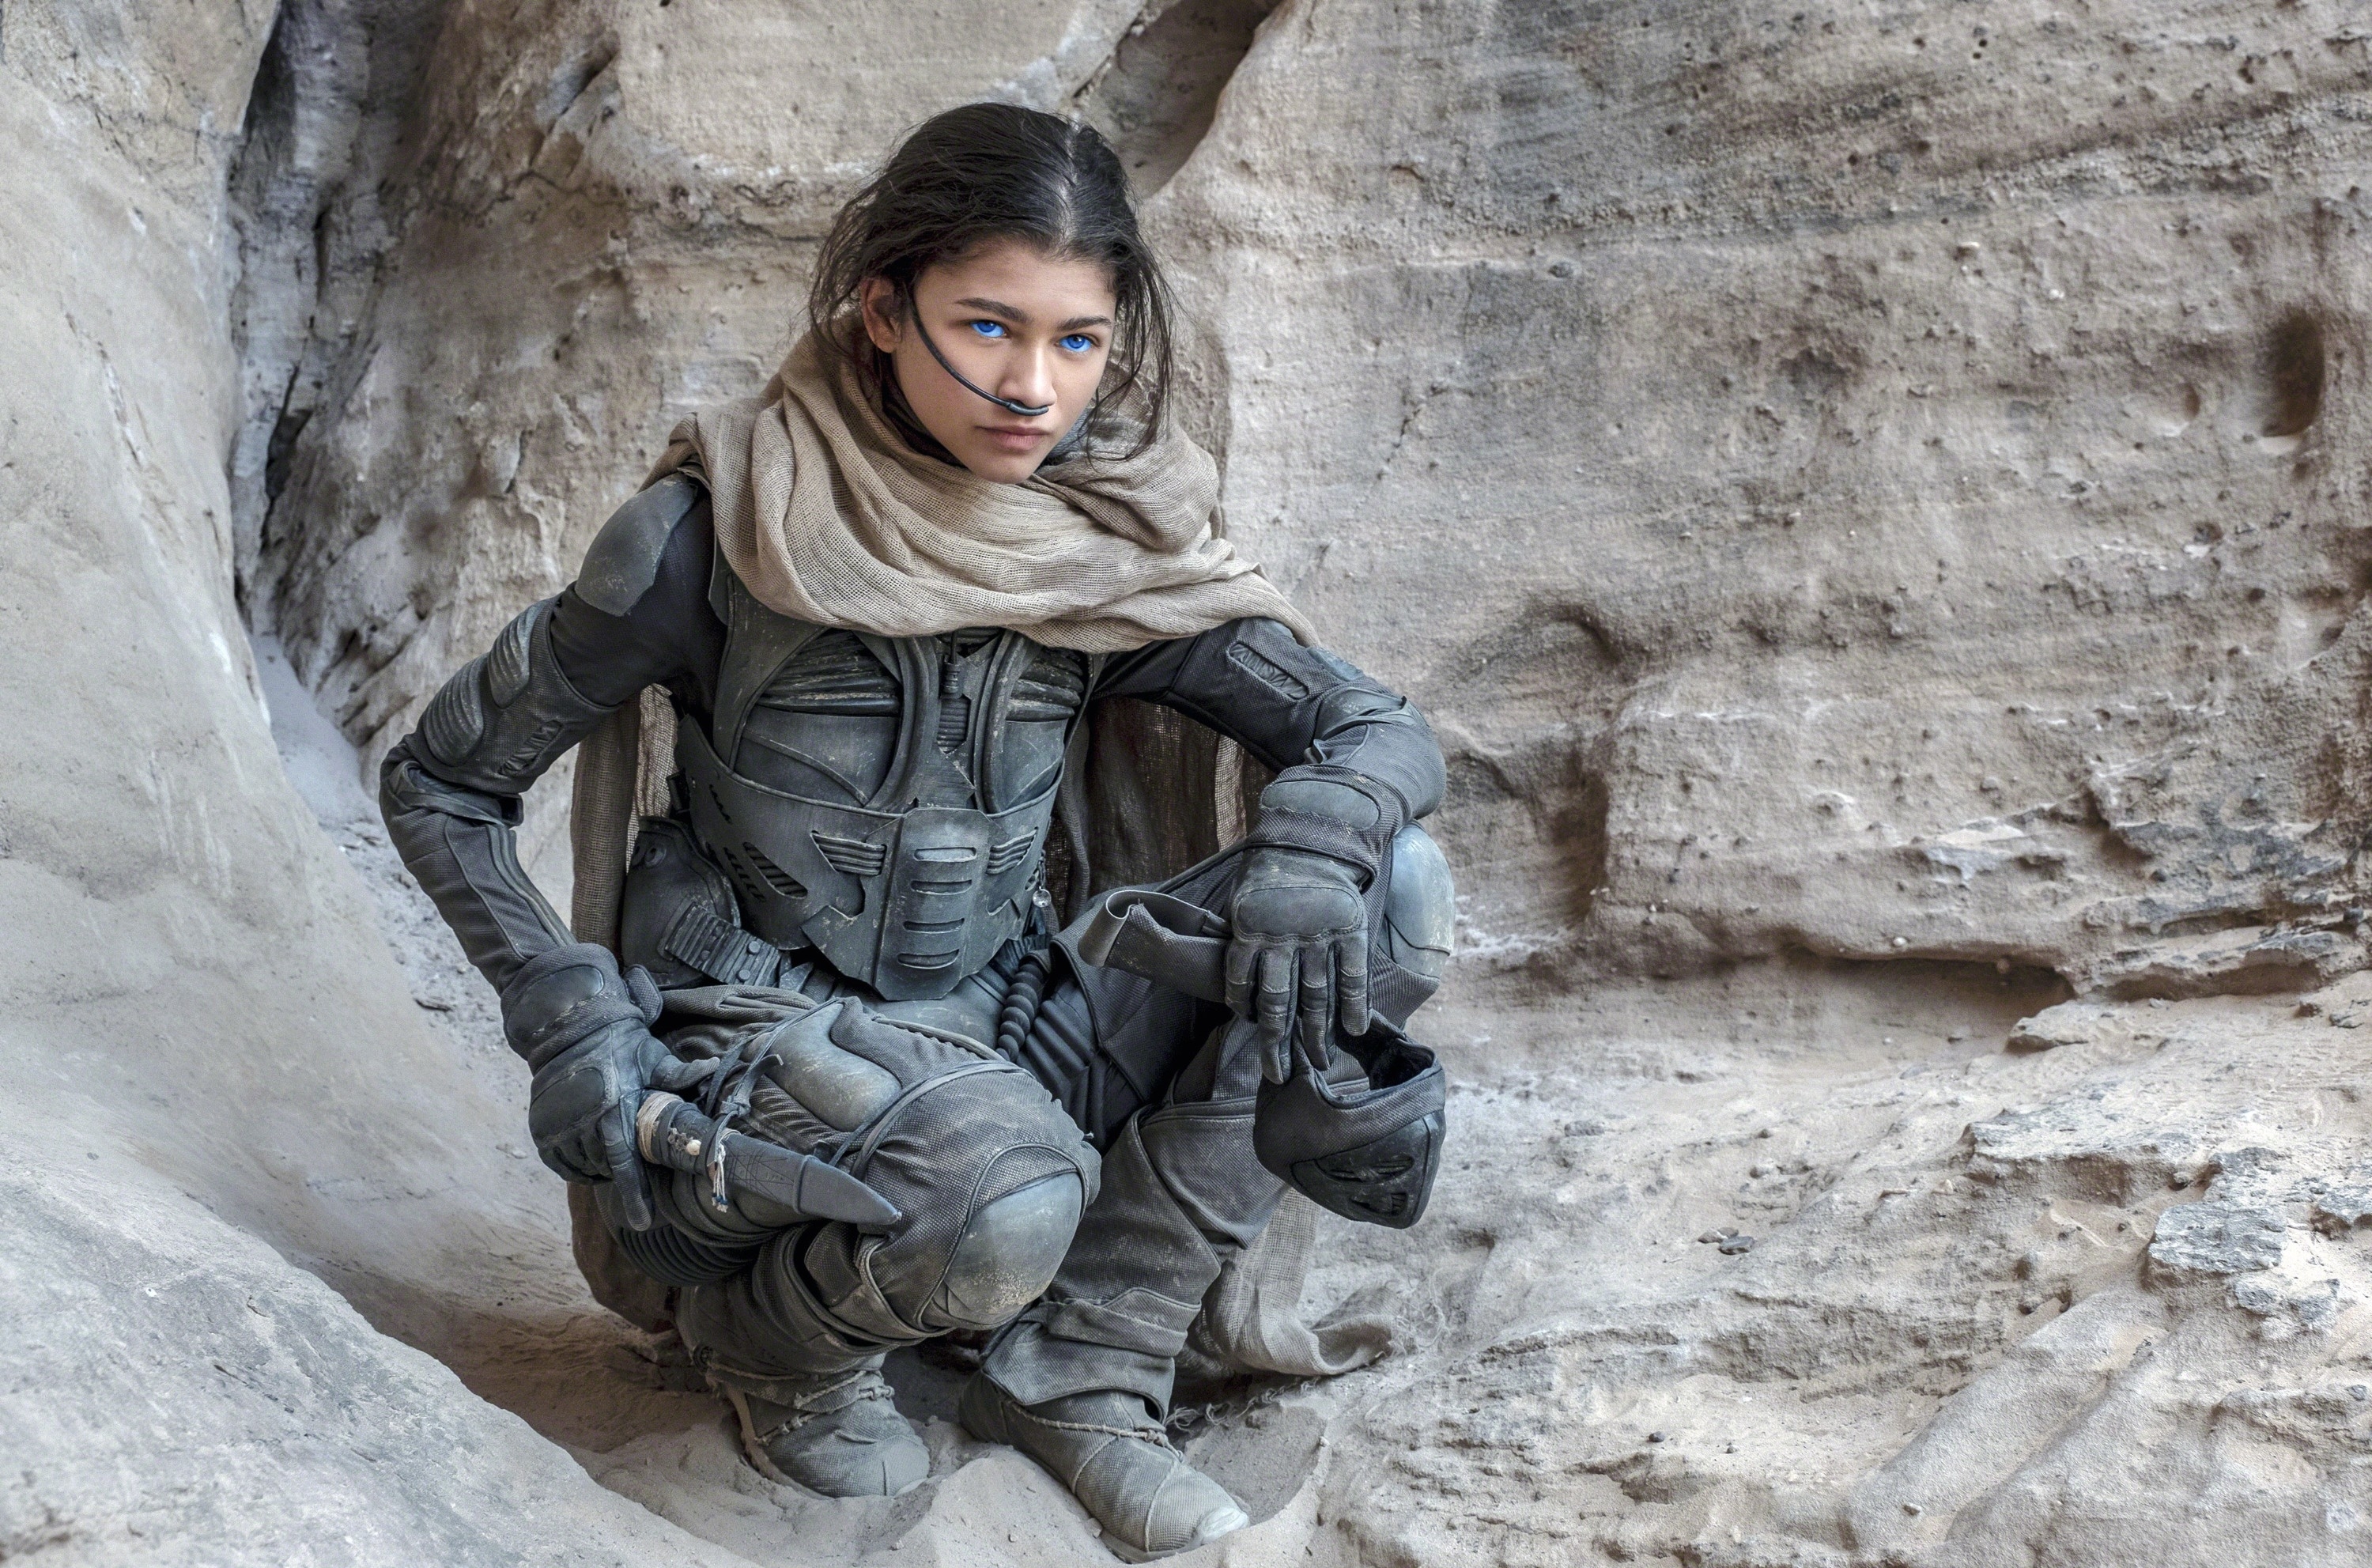 Zendaya in Dune sitting against a rock backdrop, looking thoughtful